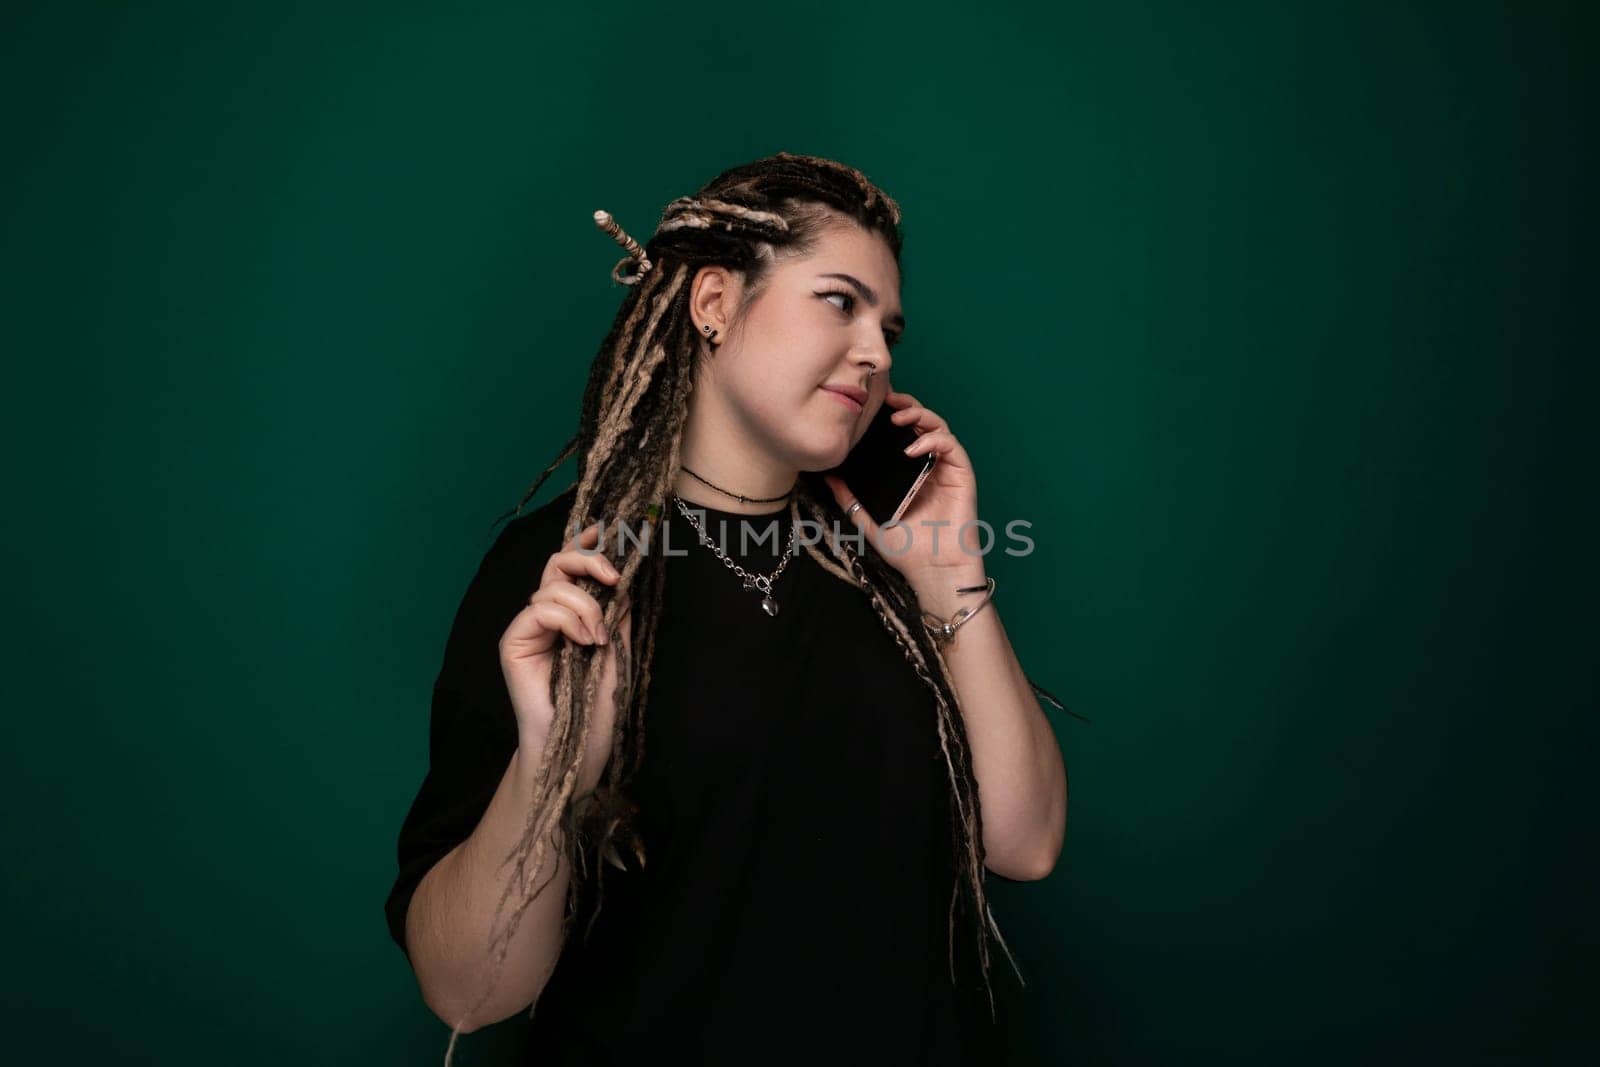 A woman with dreadlocks is engaged in a phone conversation, holding a cell phone to her ear while speaking. Her facial expression suggests she is focused on the call.